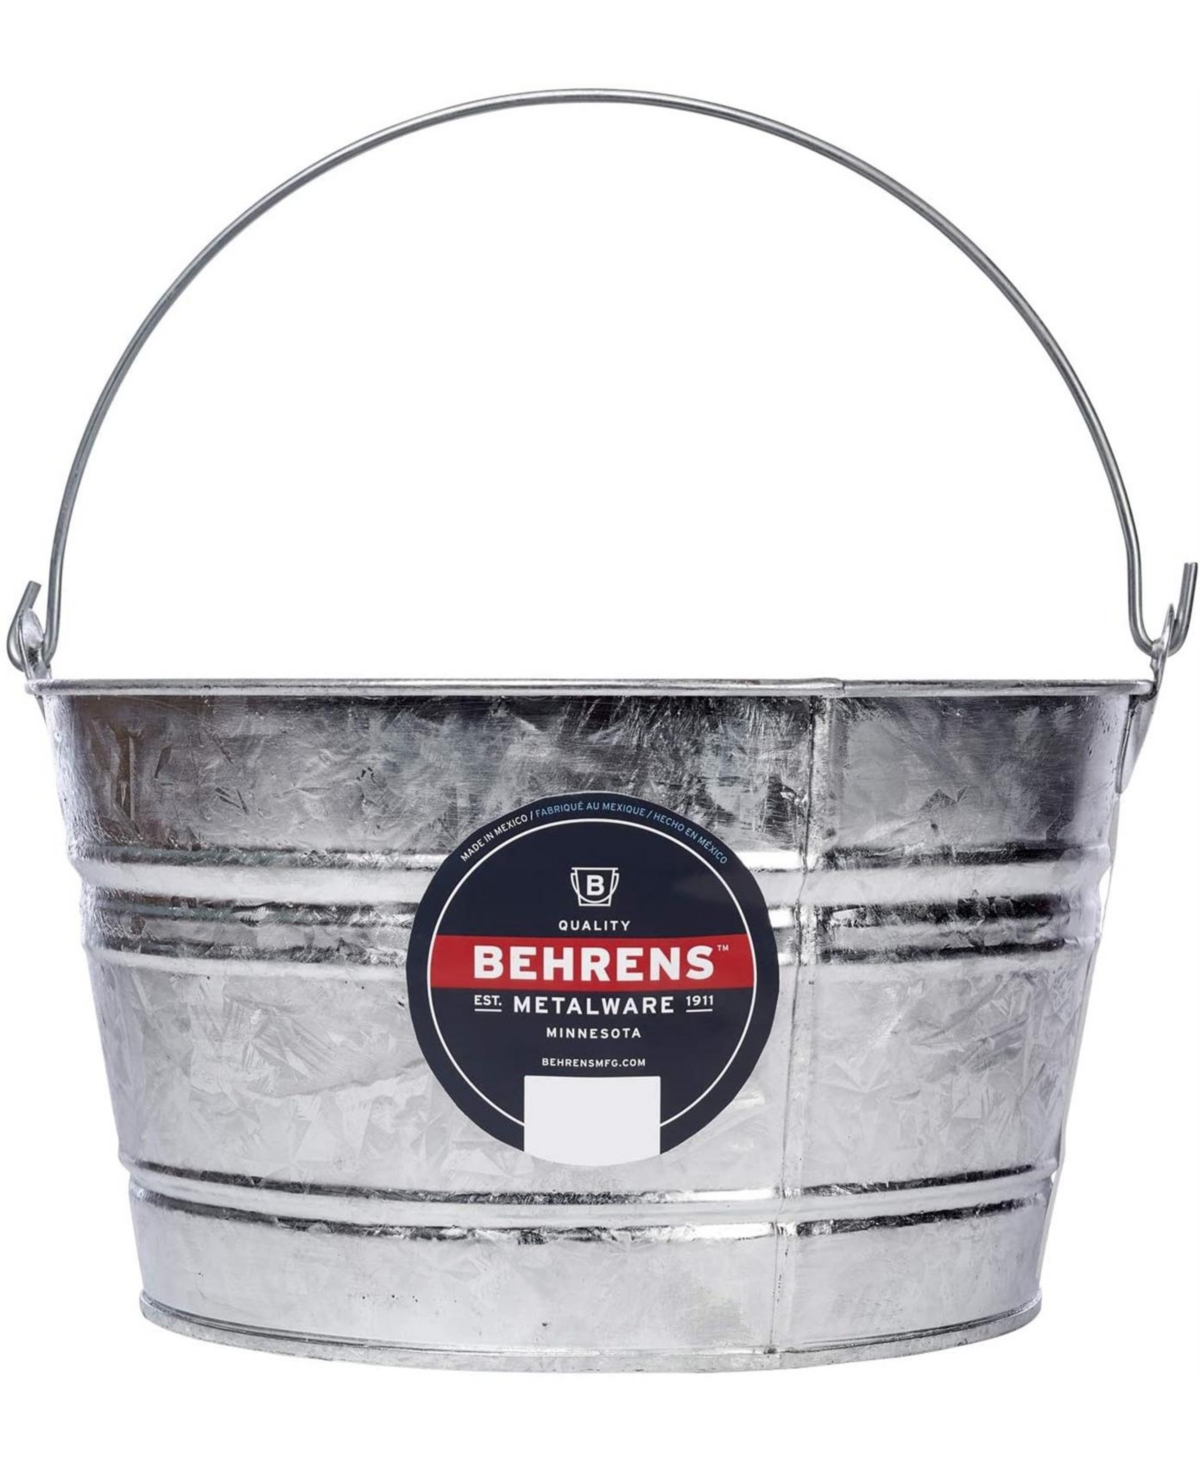 Hot-Dipped Galvanized Steel Utility Pail 4.25 gal - Silver - Silver